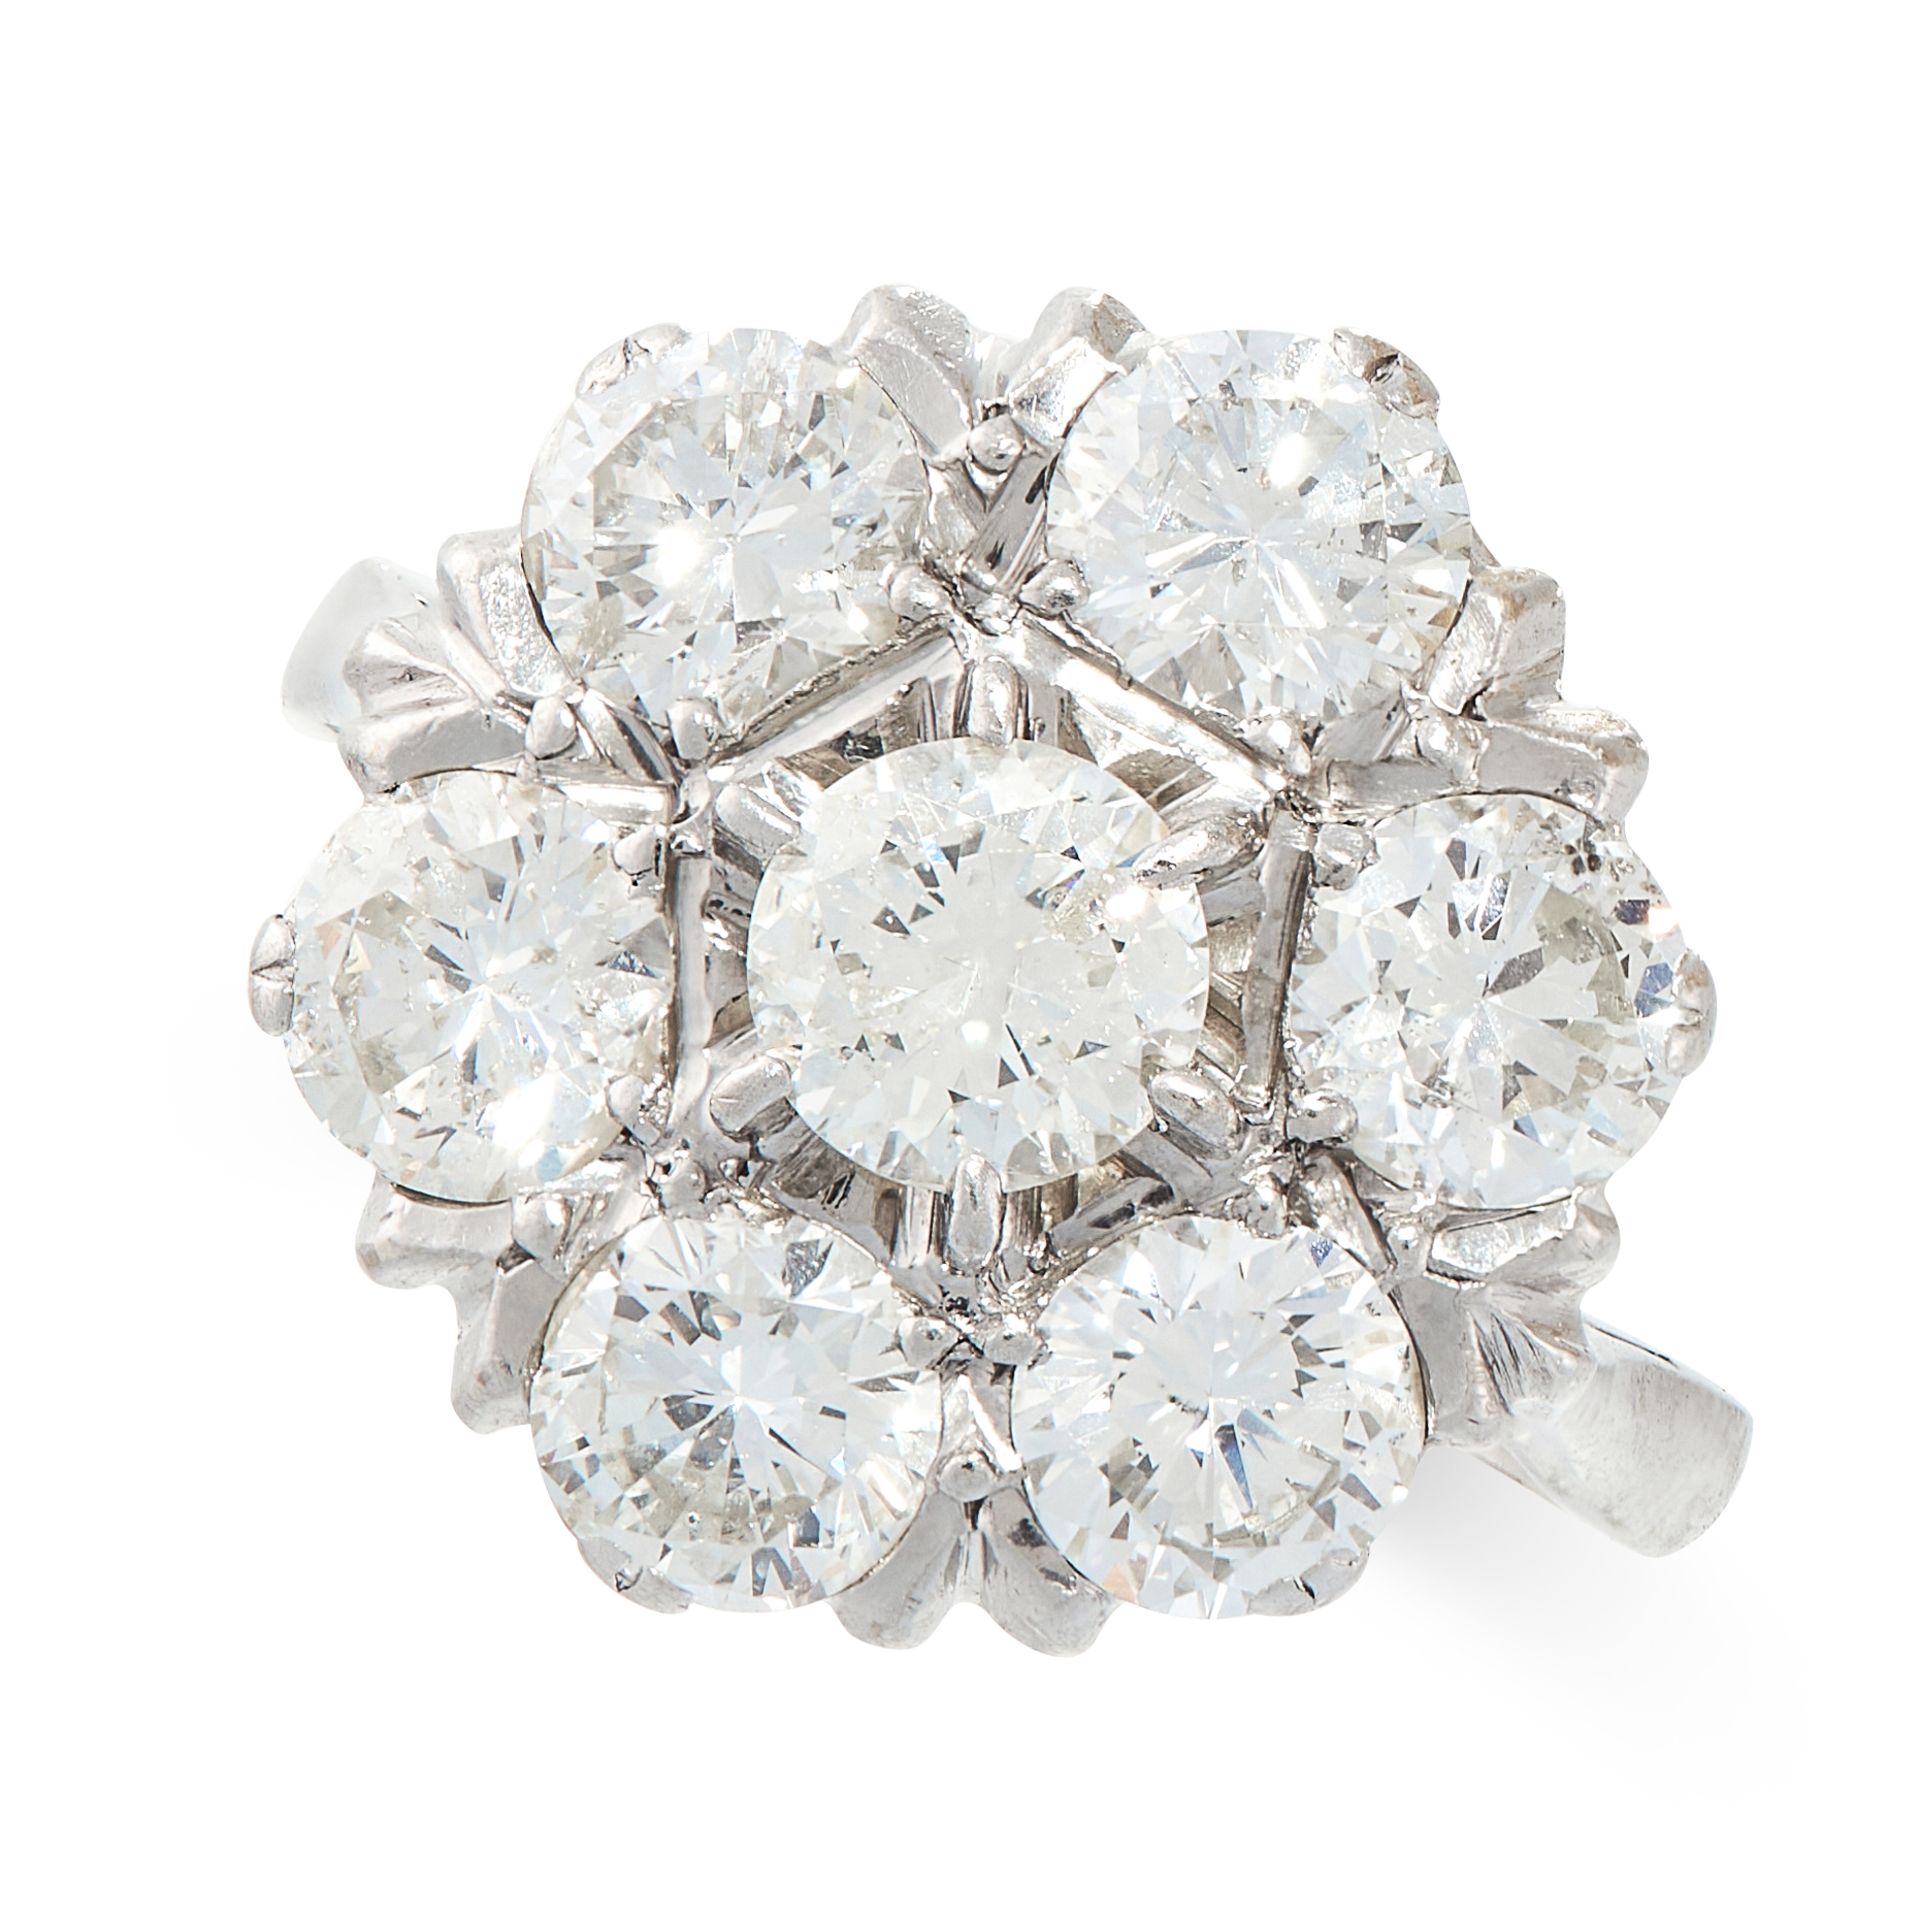 A DIAMOND CLUSTER DRESS RING in 18ct white gold, set with seven round cut diamonds, the diamonds all